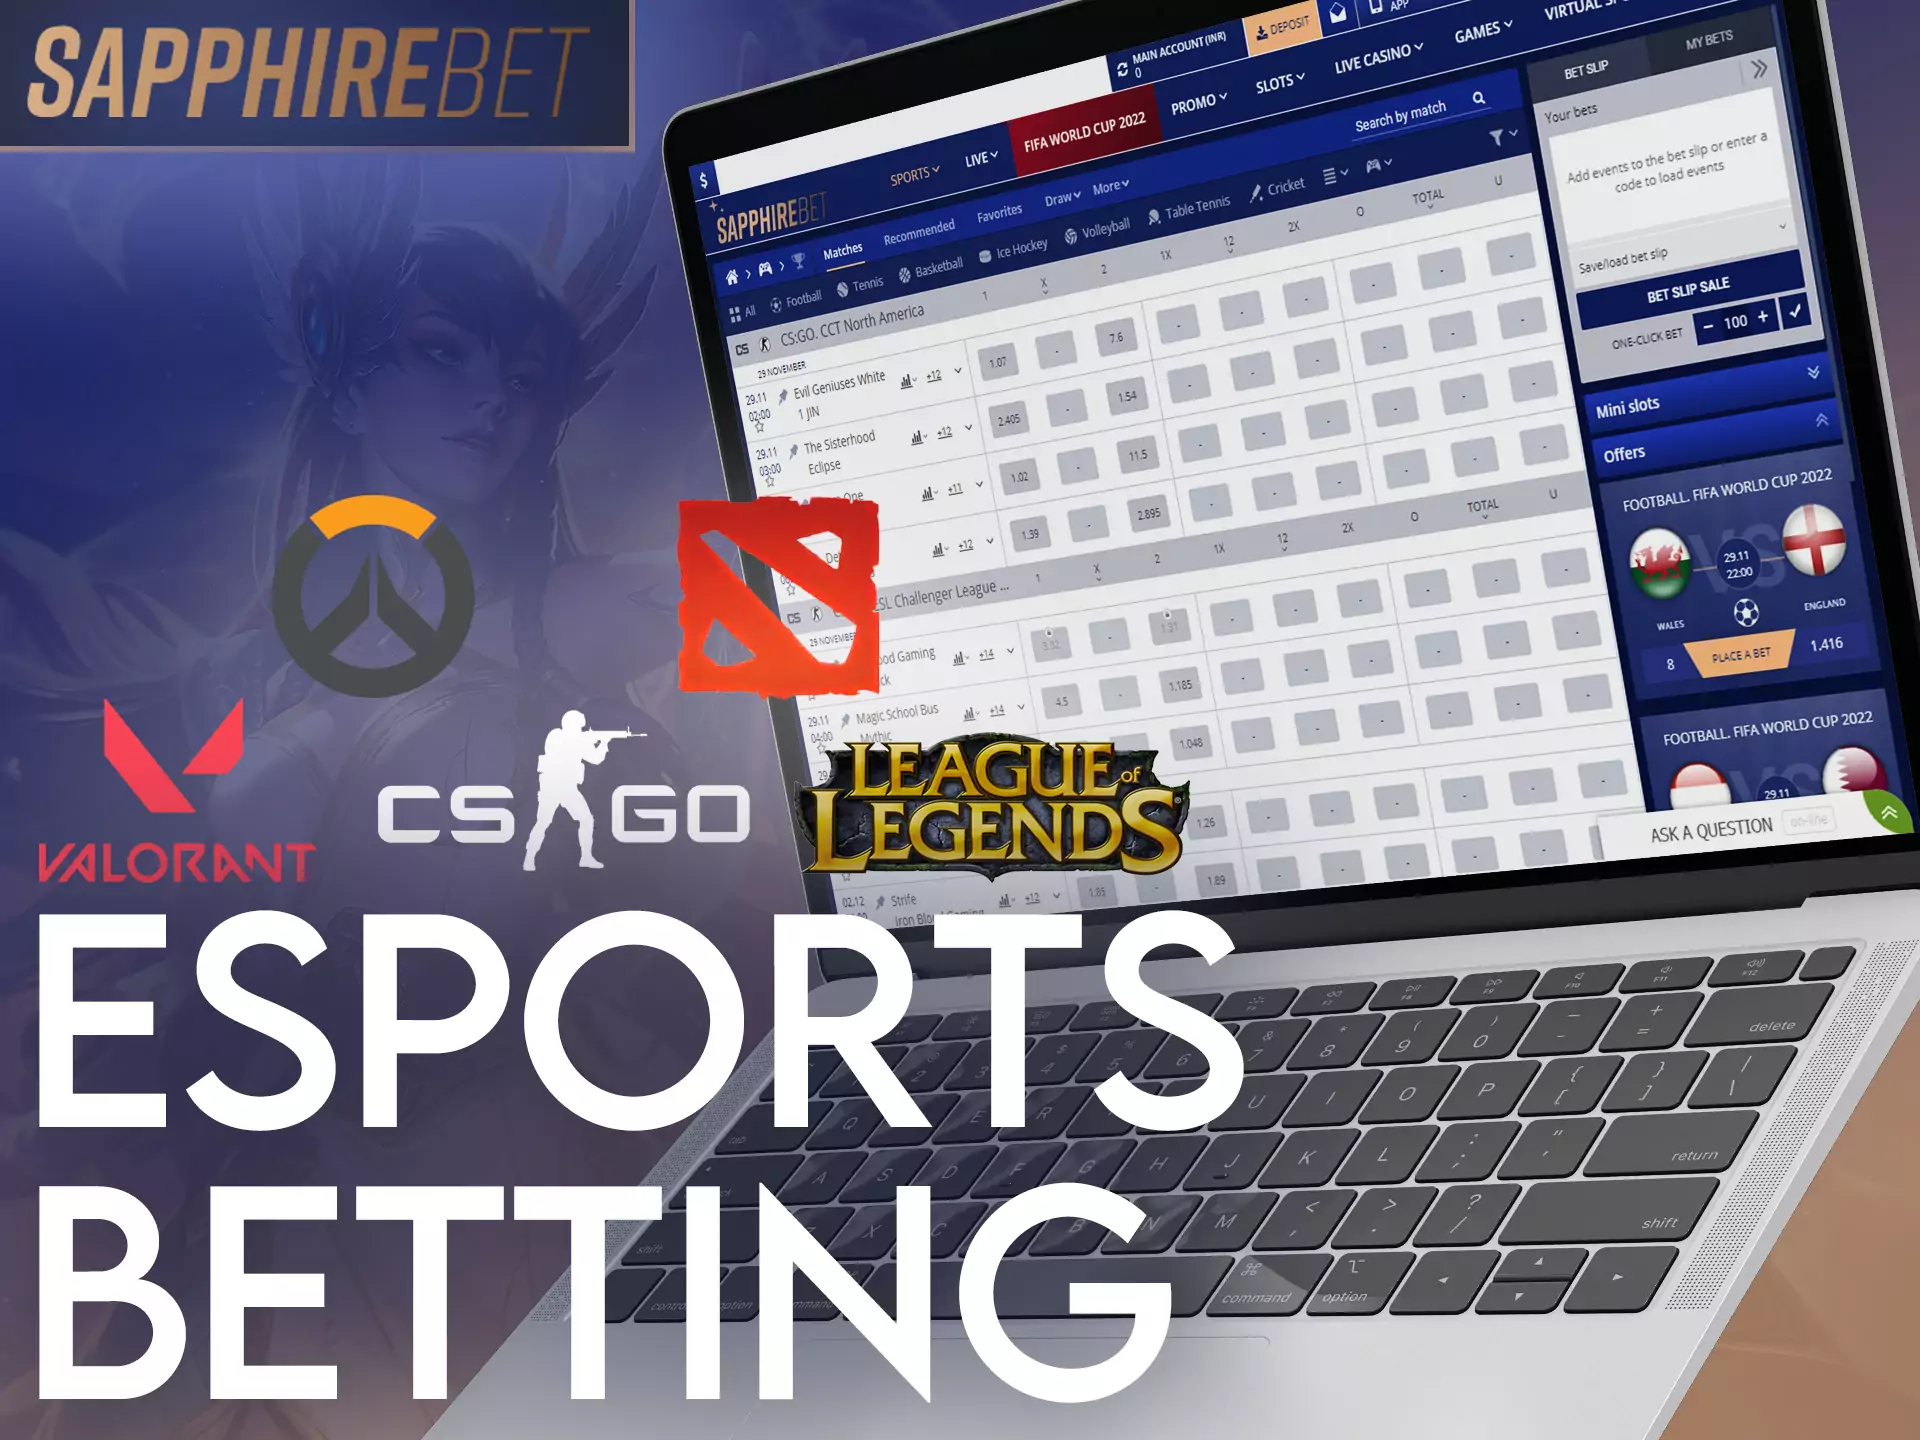 If you are a fan of esports, Sapphirebet gives you the opportunity to bet on various games.